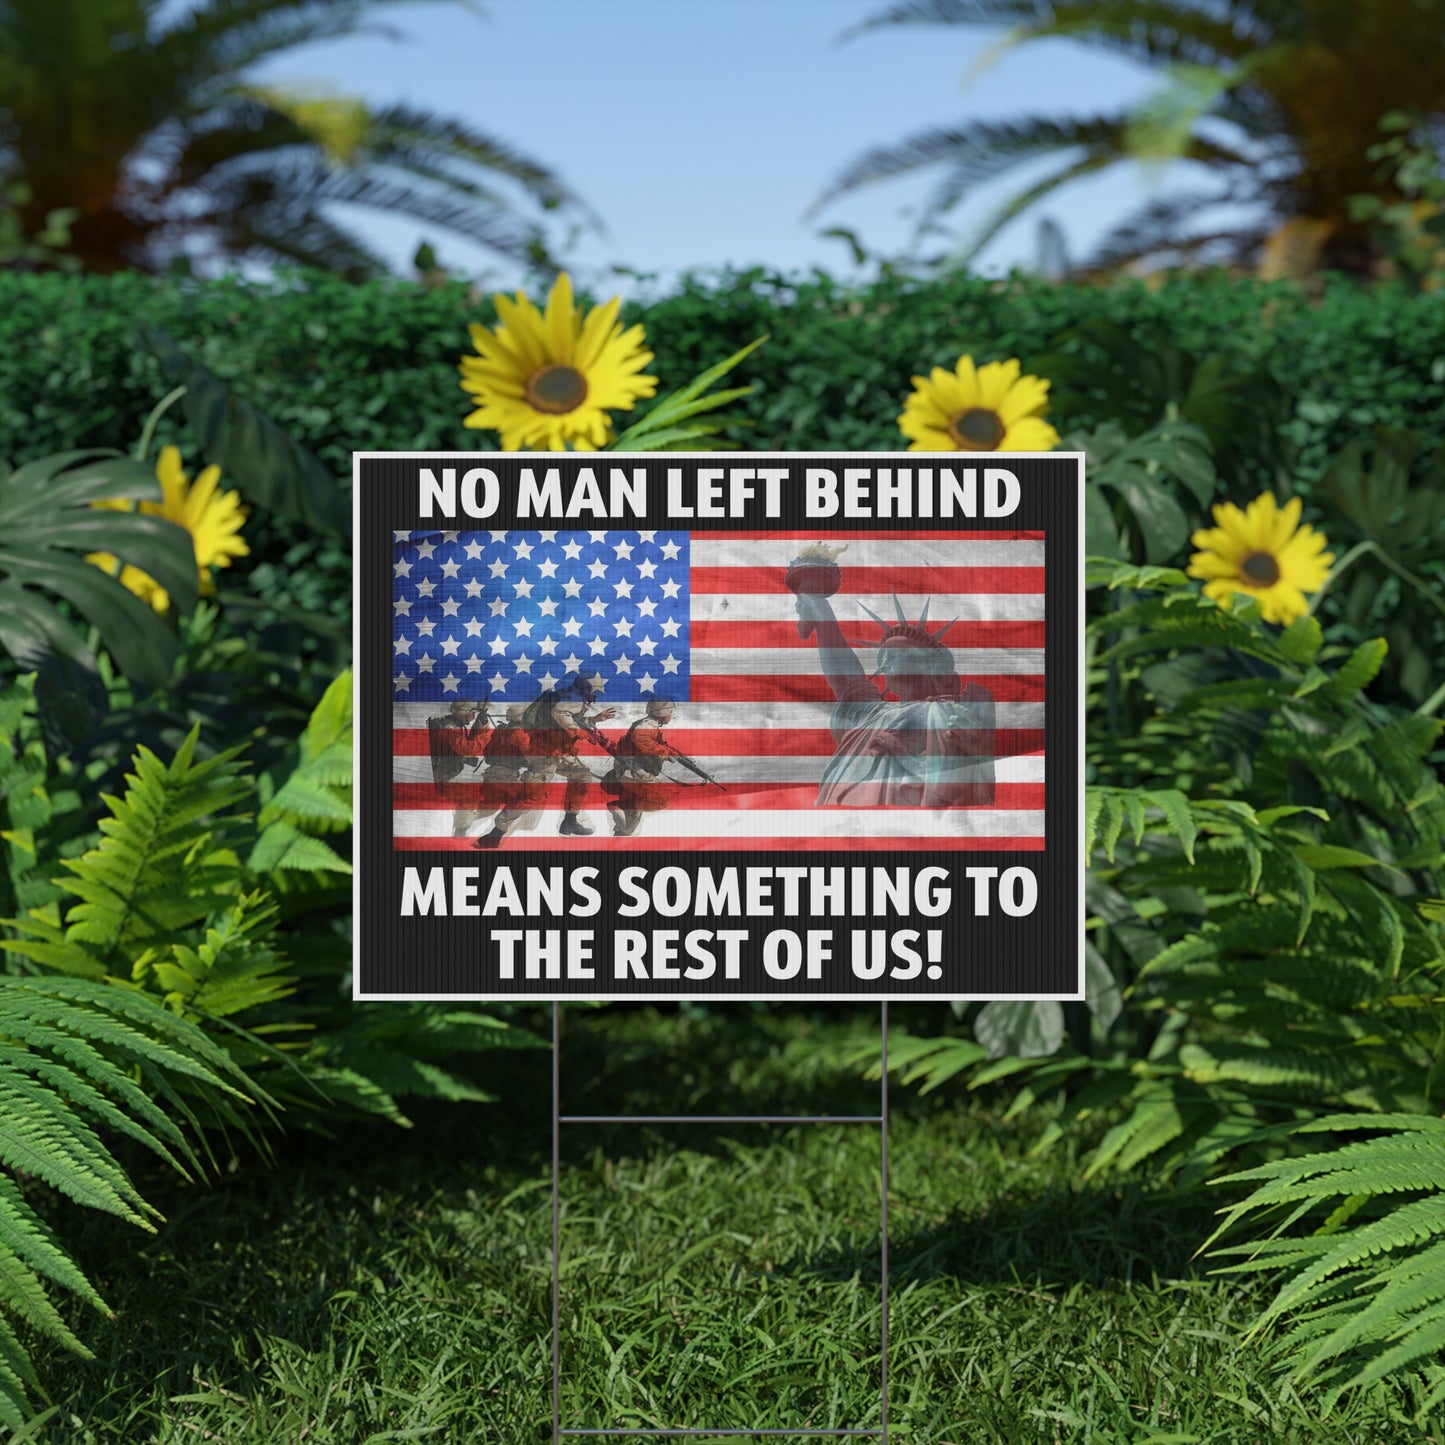 No Man Left Behind, Veterans Yard Sign, Printed 2 Sided, 12x18, 24x18 or 36x24, Metal H-Stake Included, v1